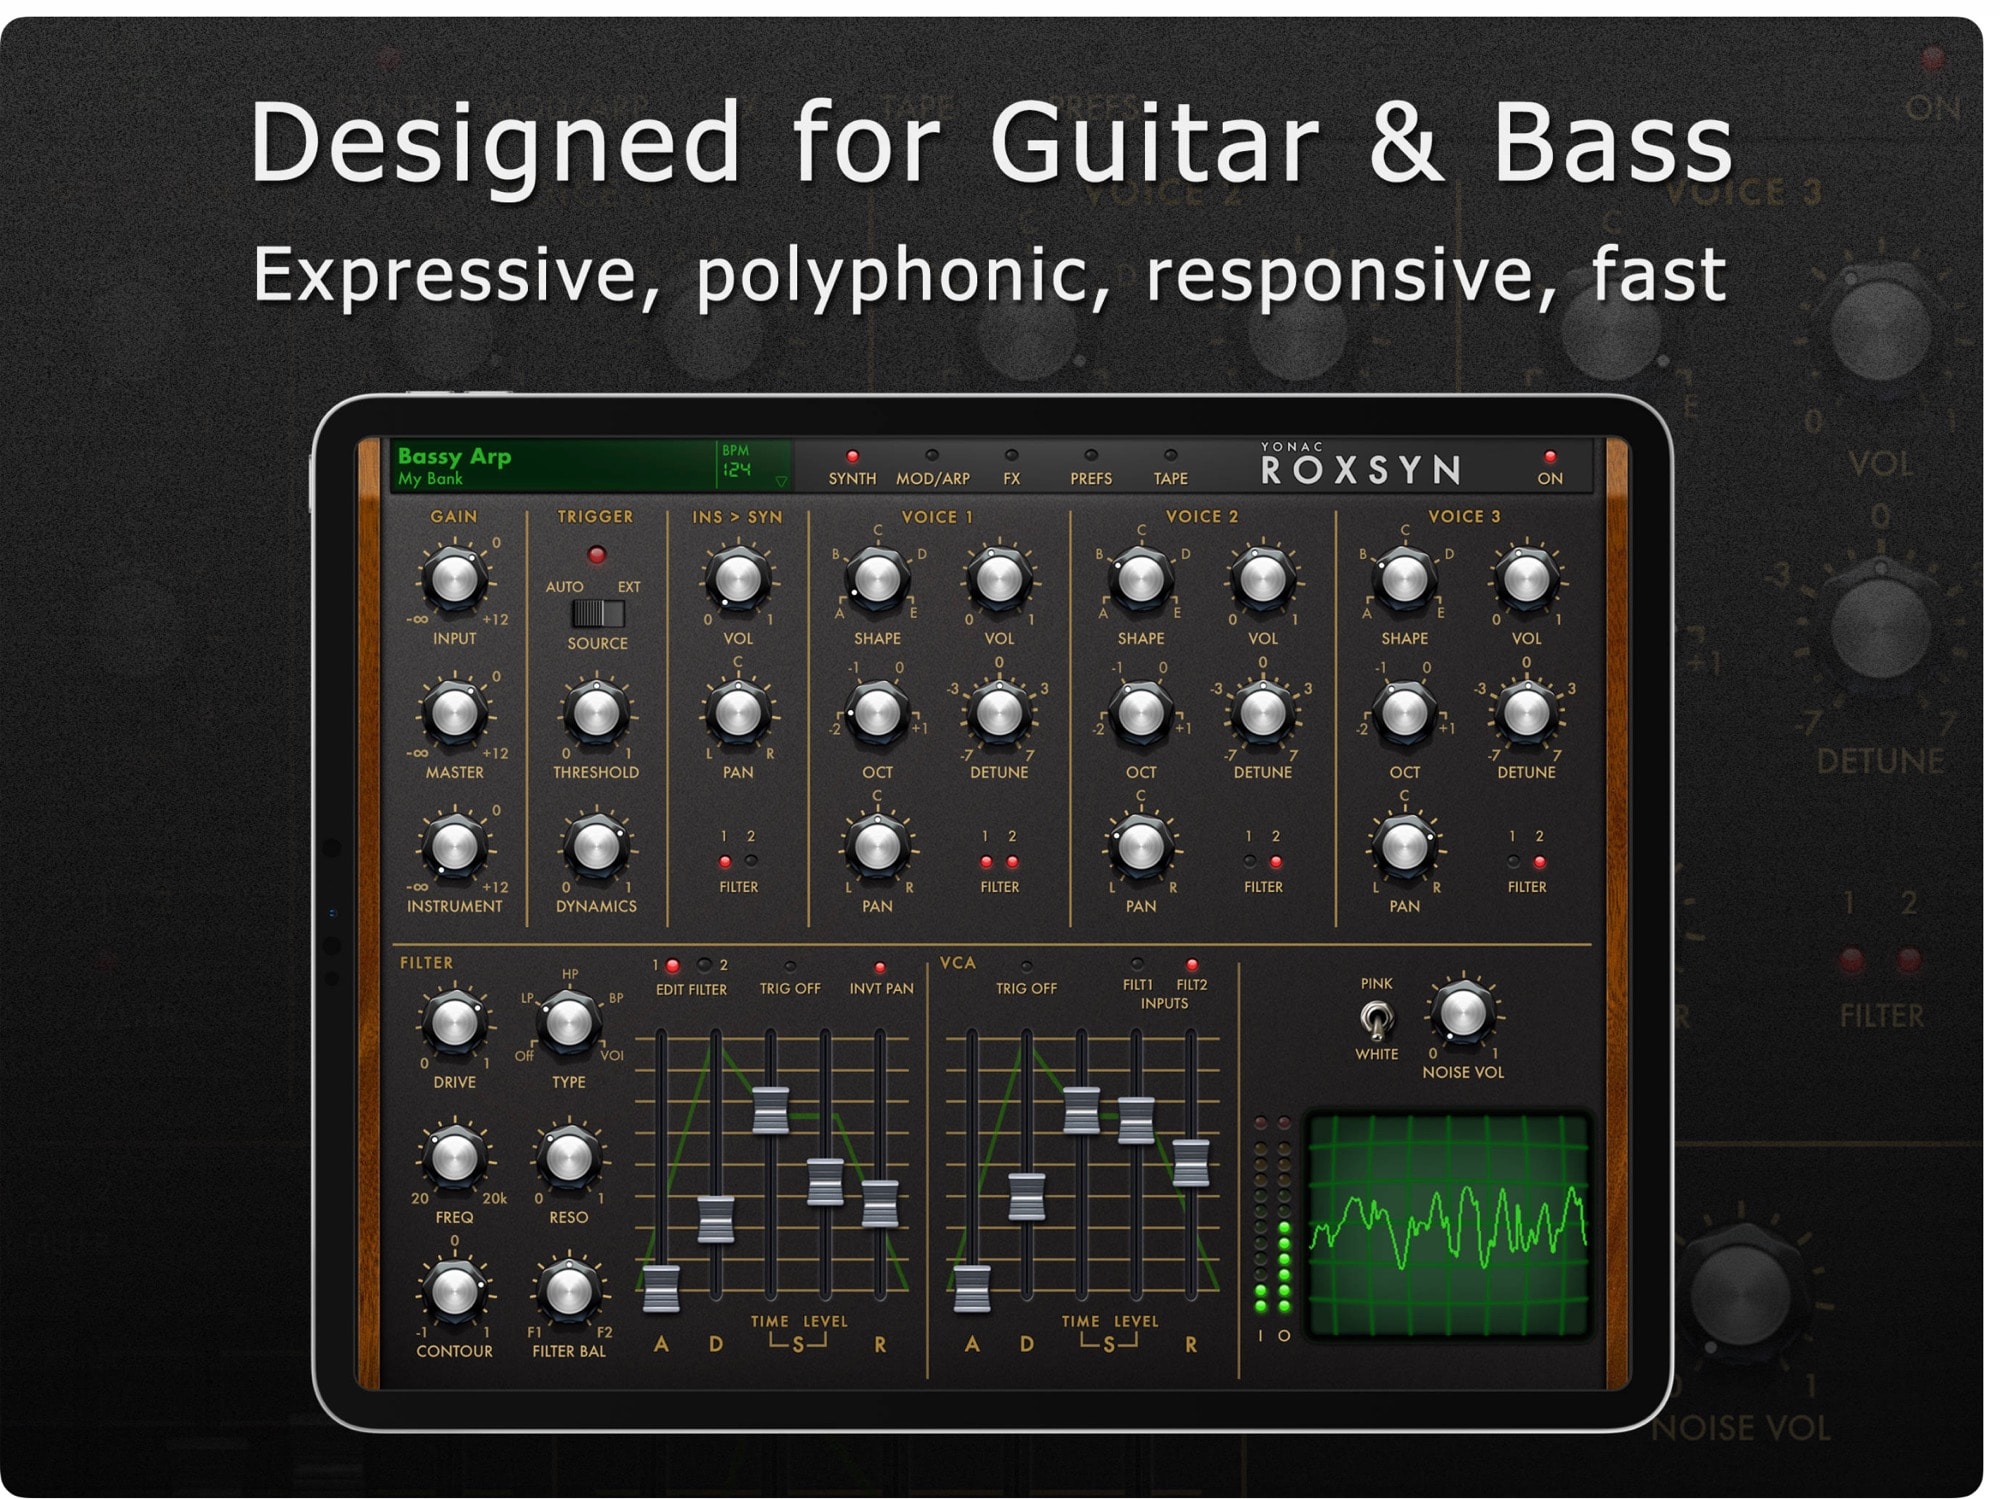 The Roxsyn guitar synthesizer app has knobs!